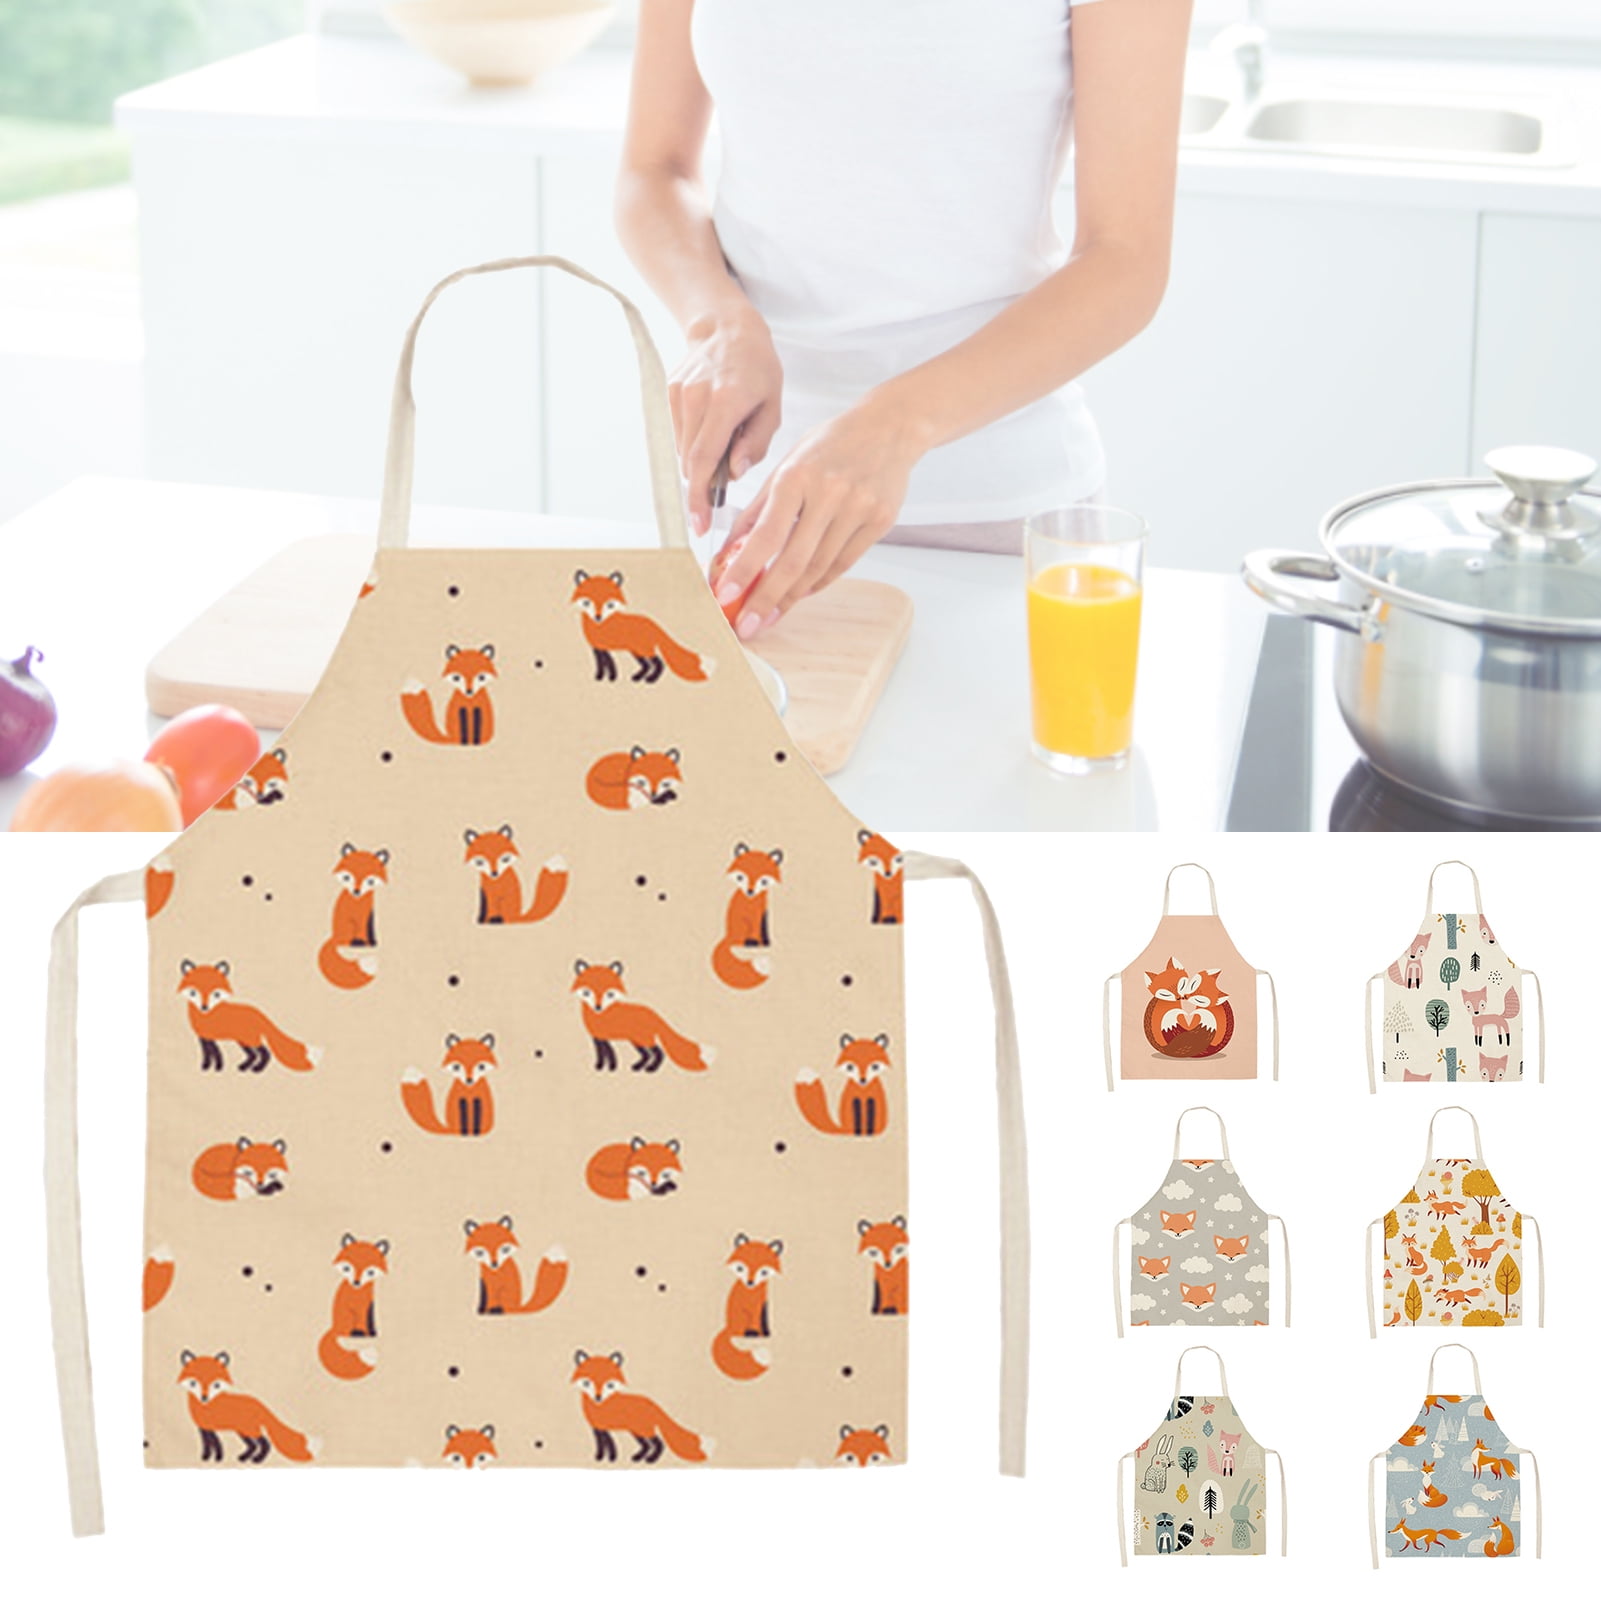 Front Pockt Printed Chefs Apron-Cats Meow Everyday Basic Home Kitchen Restaurant DII 100% Cotton Adjustable Neck and Waist Ties Pet Lover 